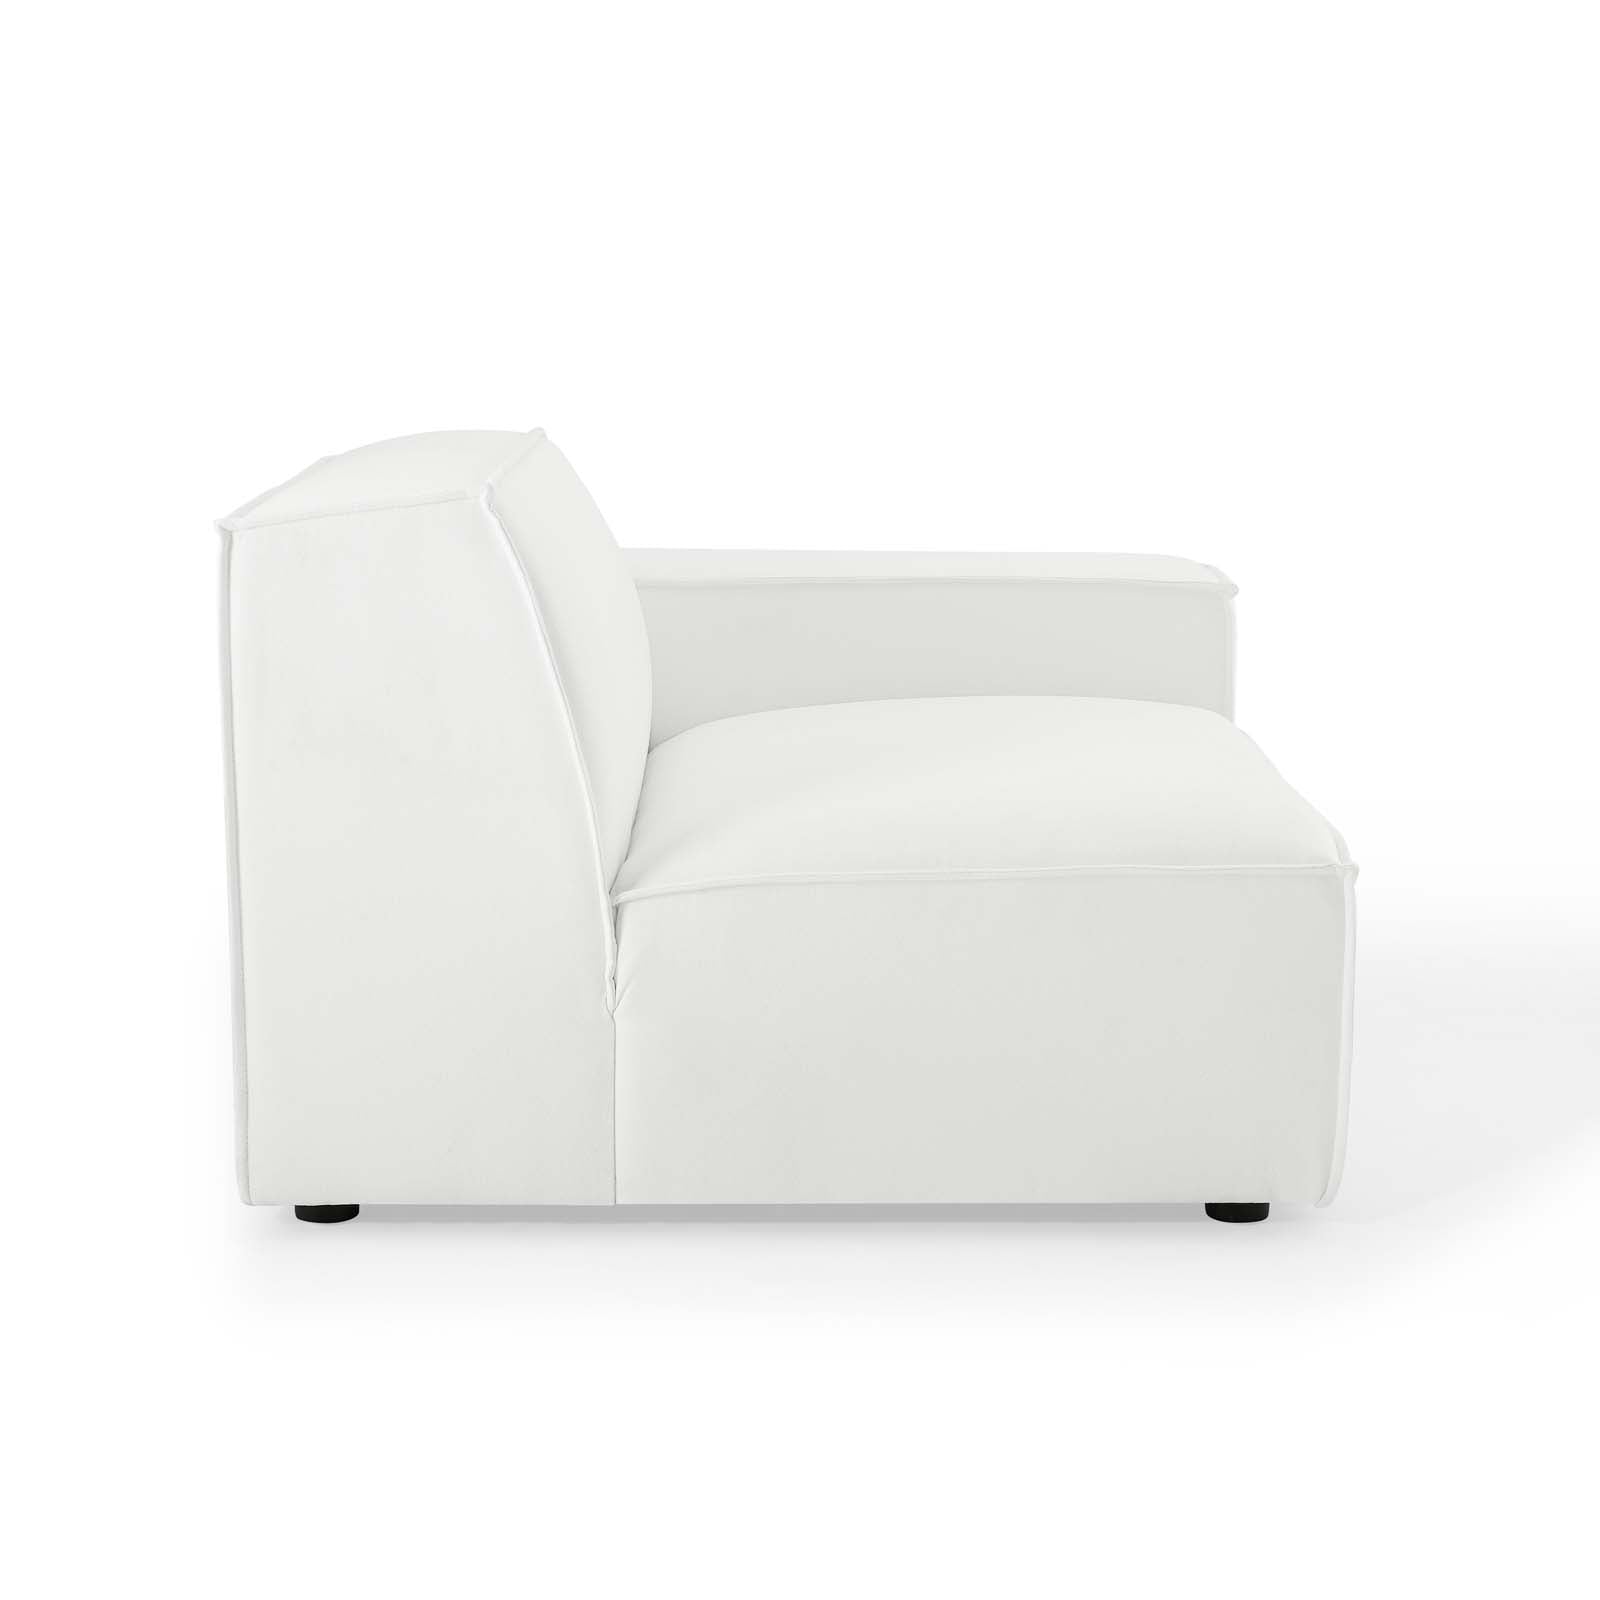 Modway Sectional Sofas - Restore 5-Piece Sectional Sofa White